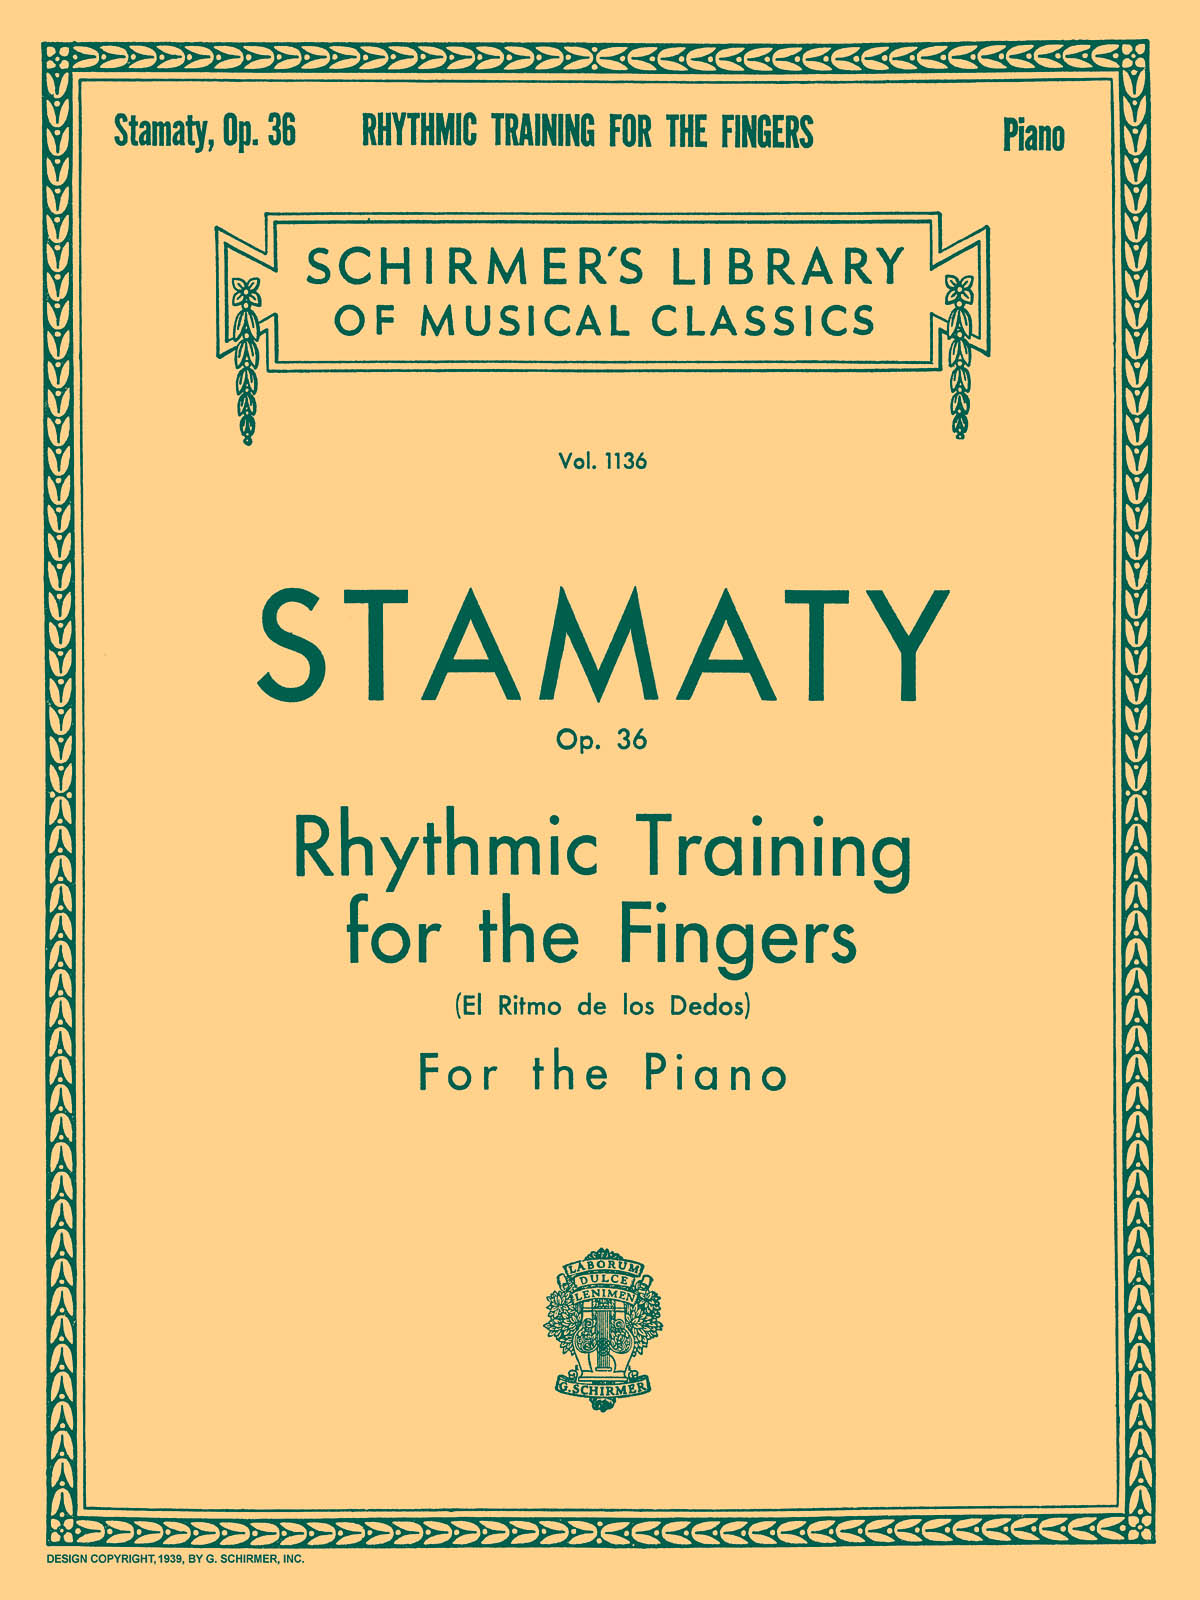 Camille-Marie Stamaty: Rhythmic Training For The Fingers, Op. 36